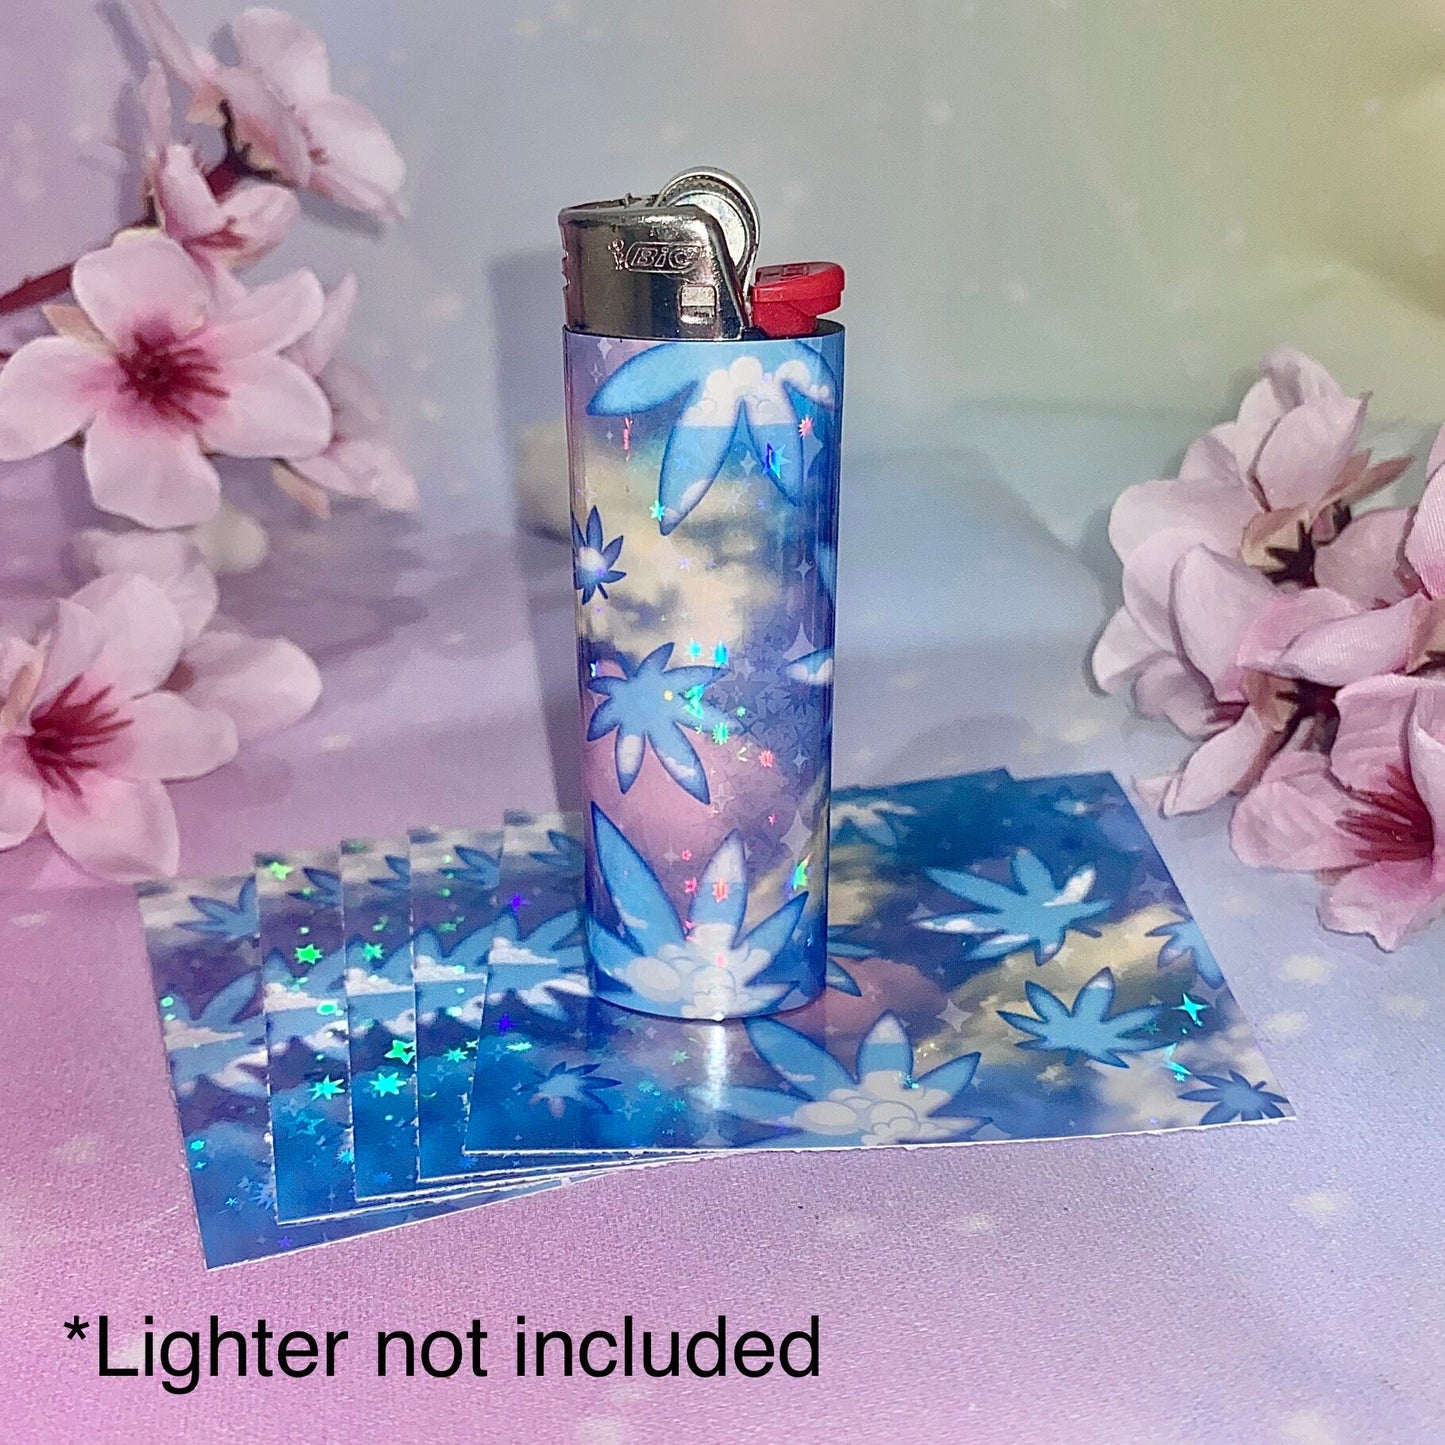 Toking Galaxies Lighter Wrap | weed lighter wrap, Kawaii lighter wraps, lighter wraps, cannabis art, girly stickers, Kawaii, stickers